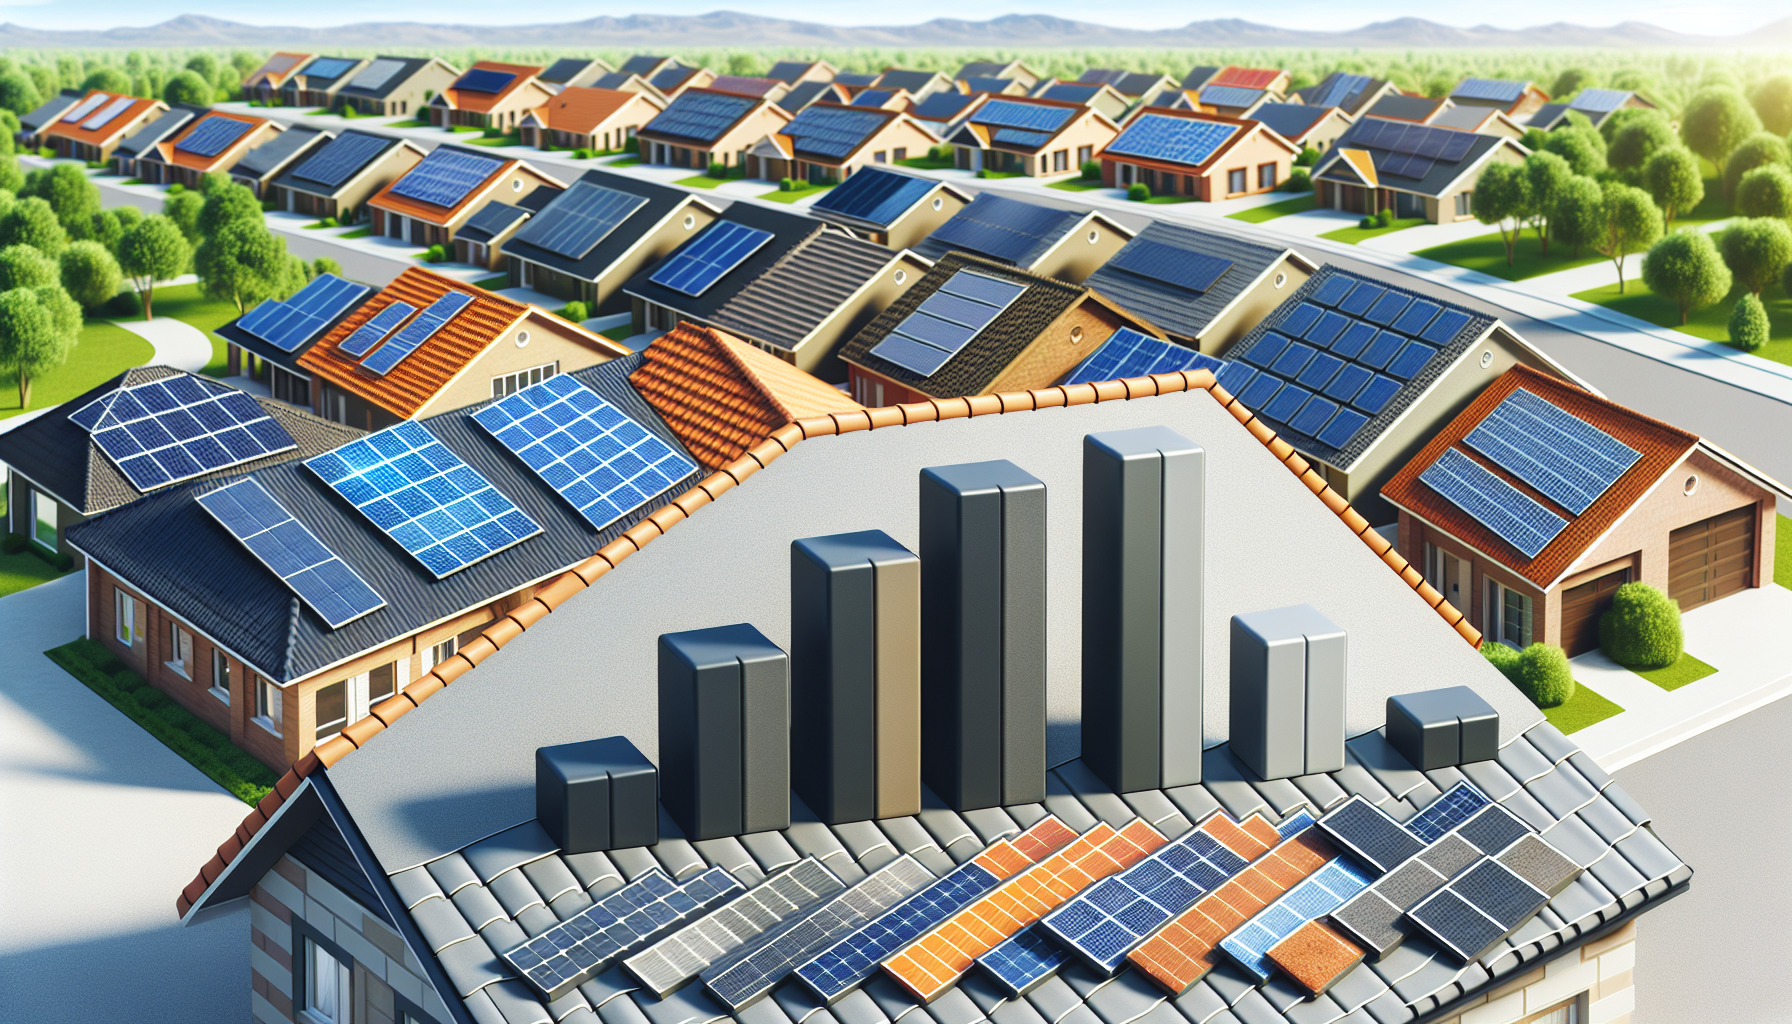 Choosing compatible roofing materials for solar panels